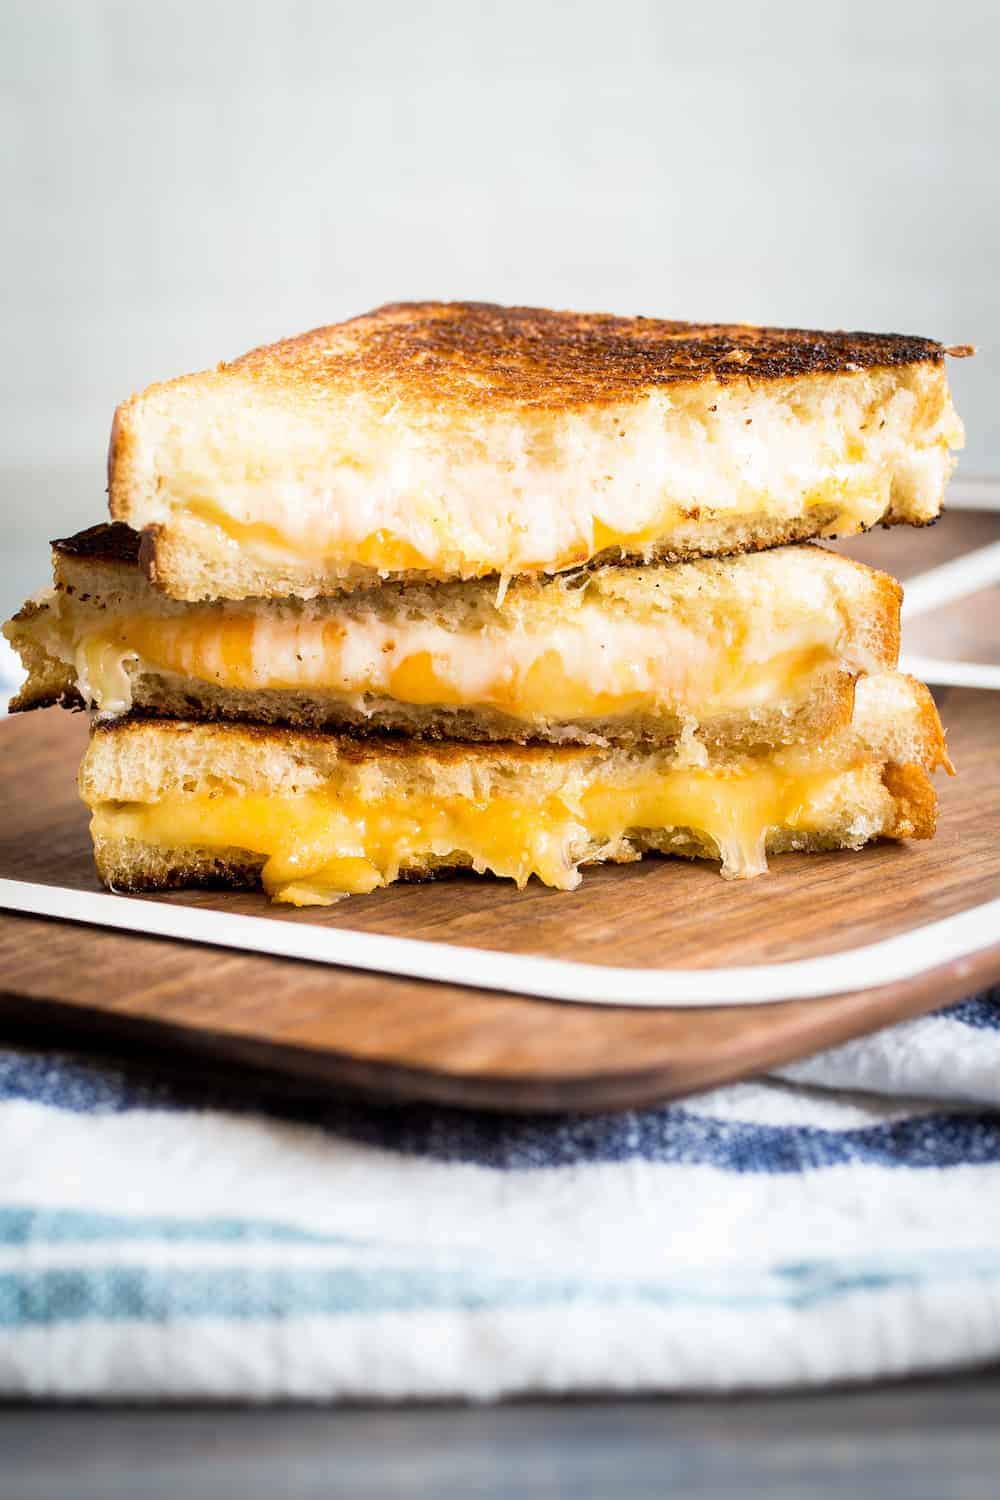 How to Make a Cheese Sandwich | Good. Stories.